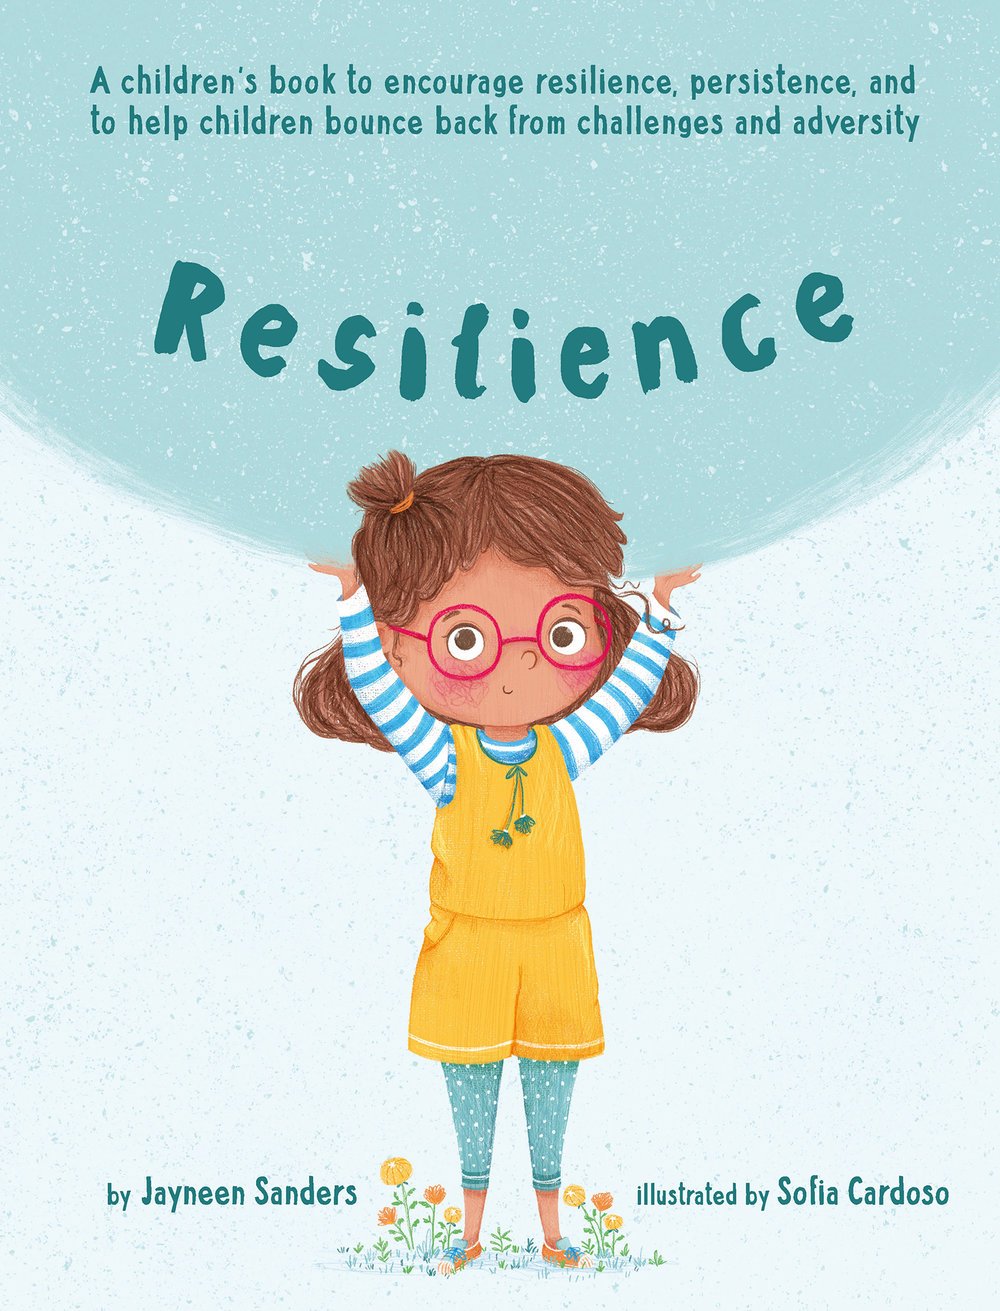 Resilience